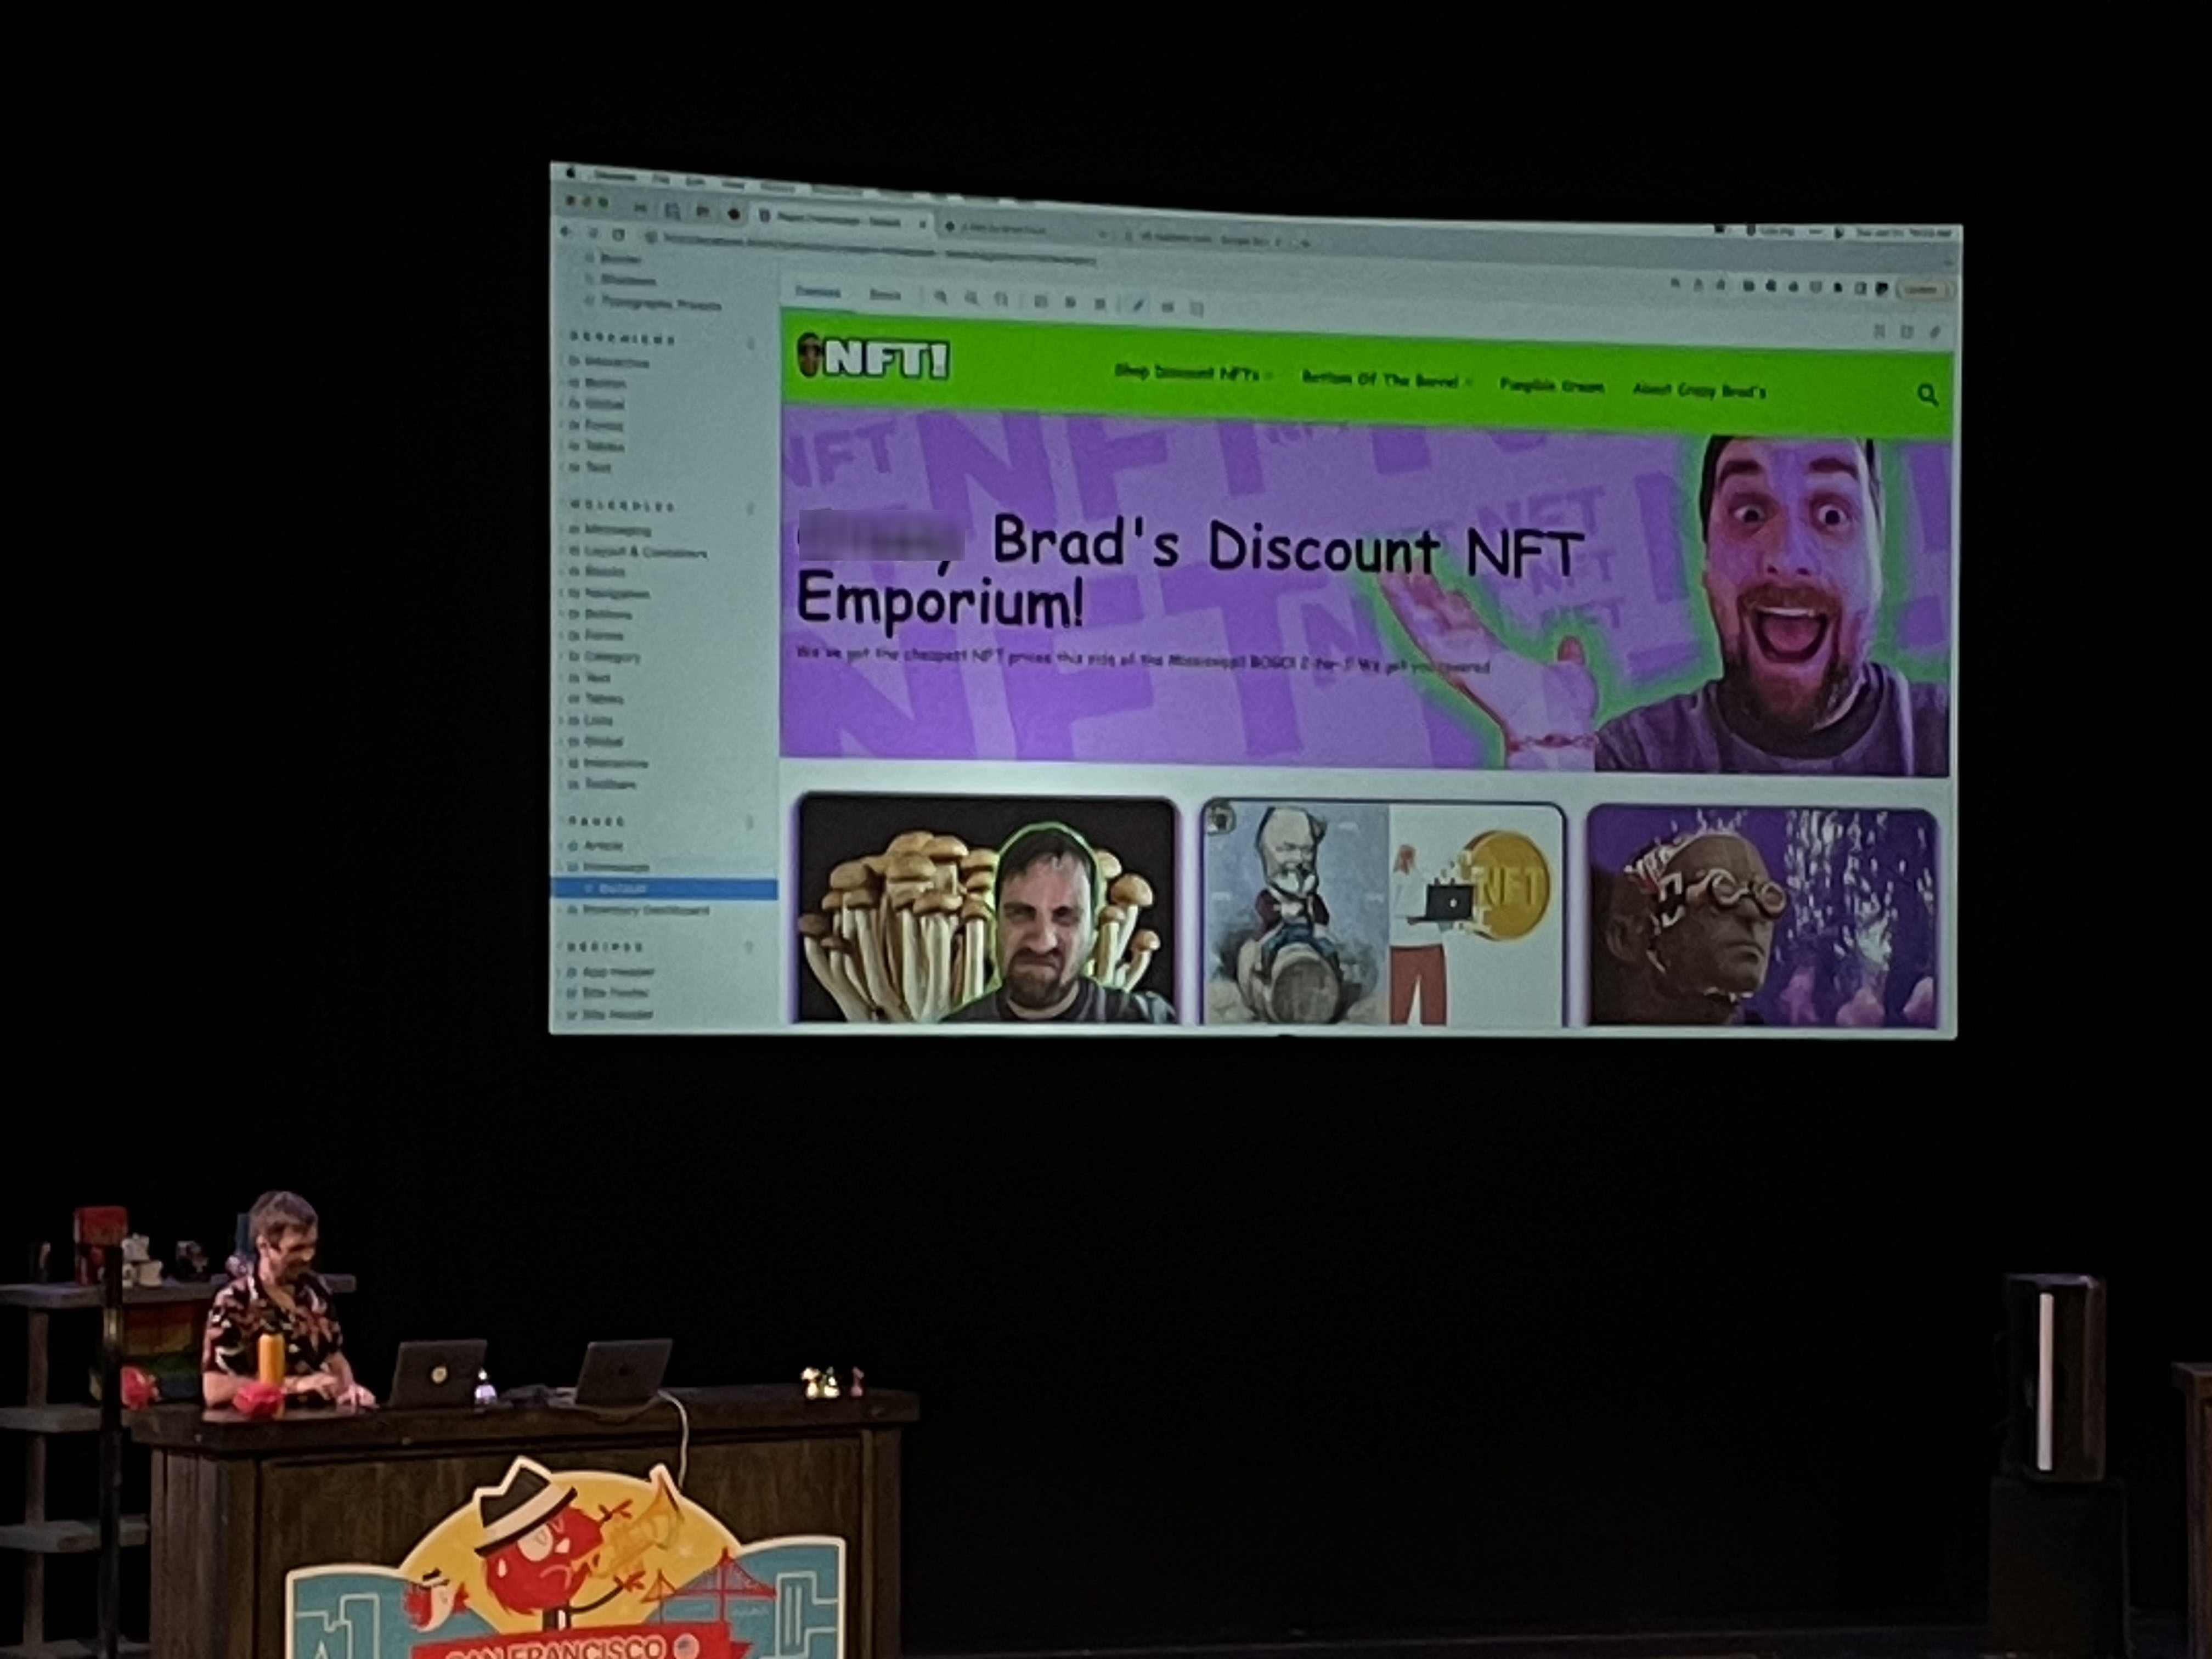 Brad frost on stage
talking bout design systems
with a demo of
'Brads discount NFT emporium'
in comic sans
